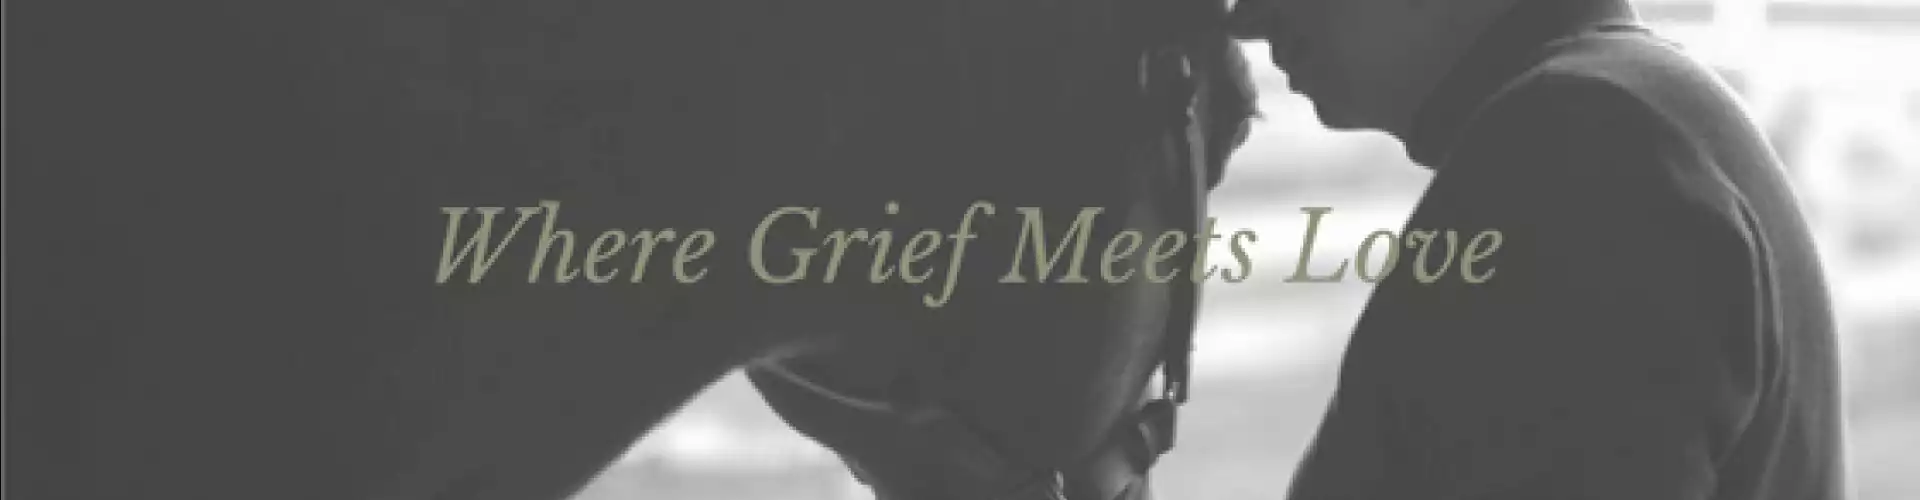 Where Grief Meets Love